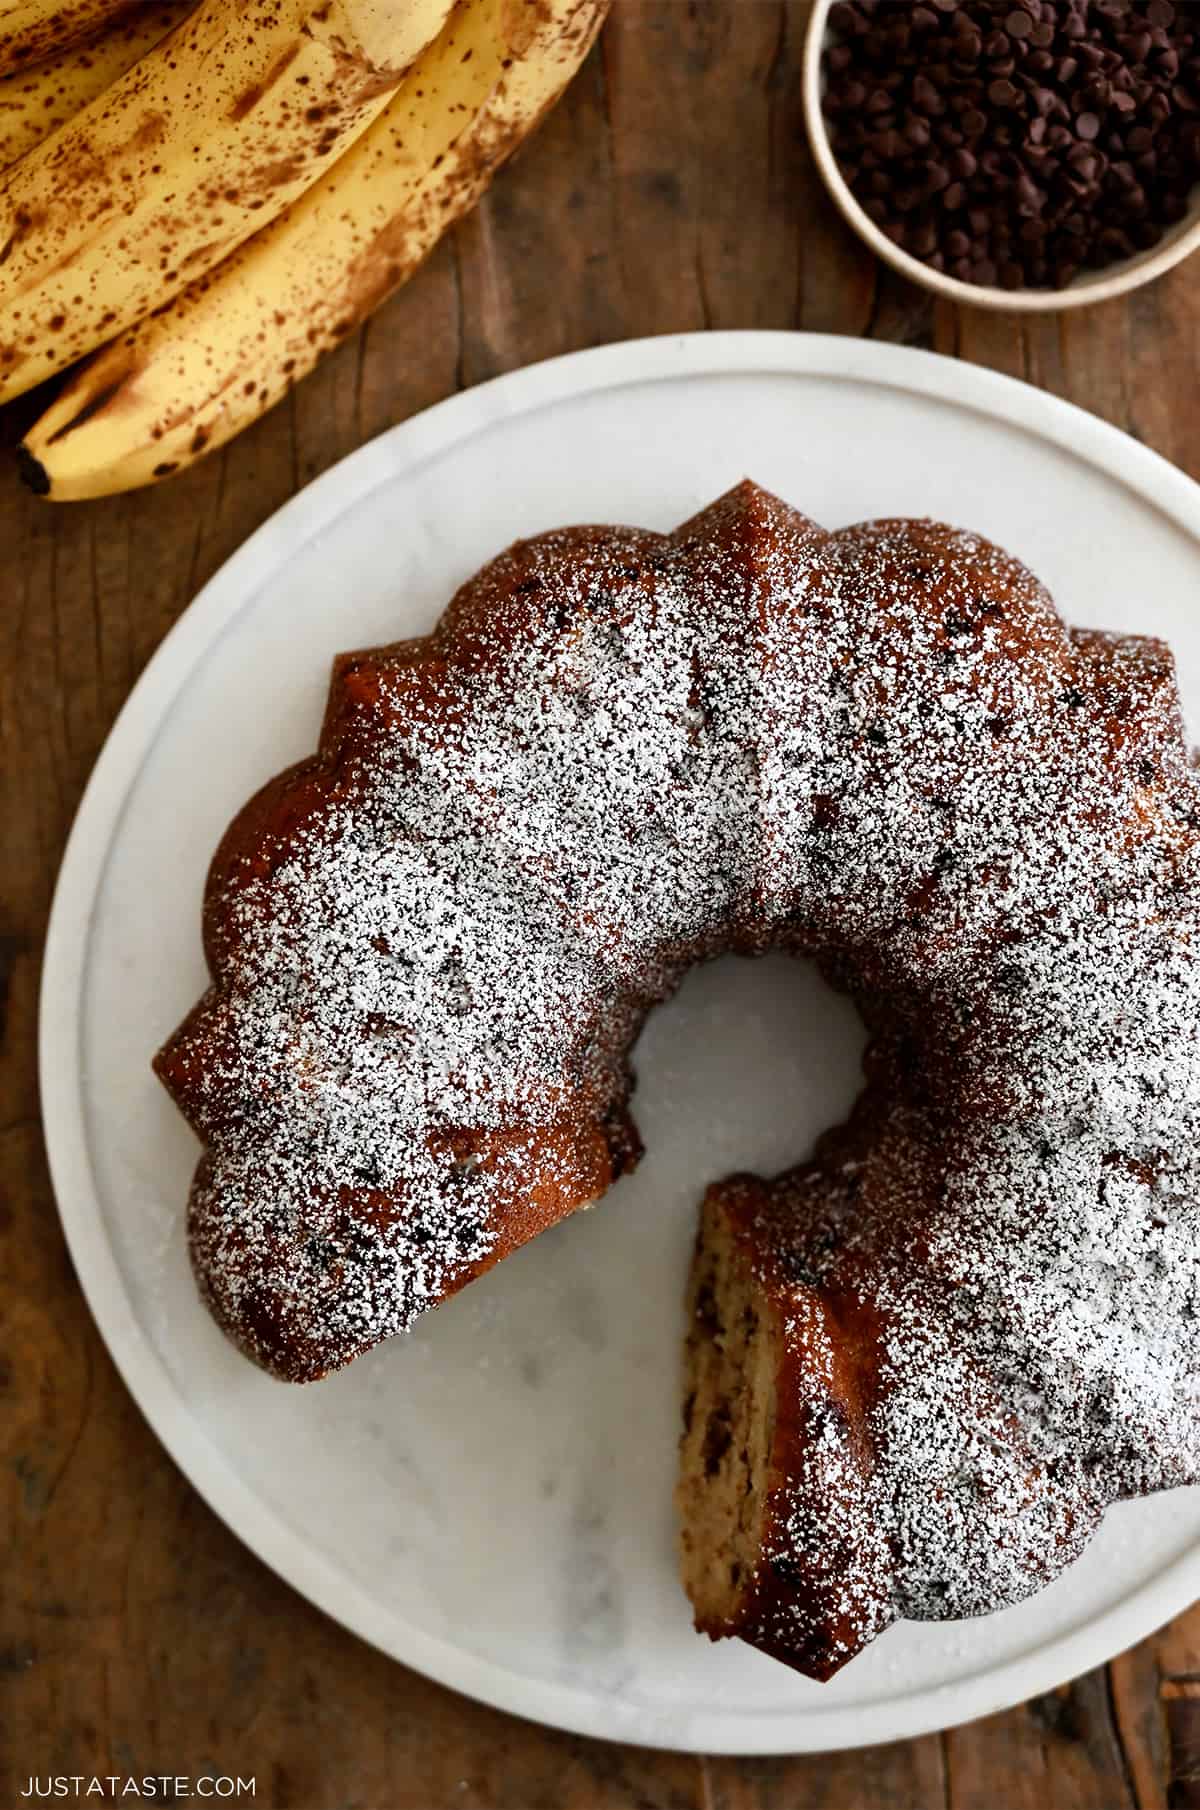 A top-down view of a chocolate chip banana bundt cake dusted with powdered sugar on a round cake platter next to a bunch of overripe bananas and a bowl containing mini chocolate chips.